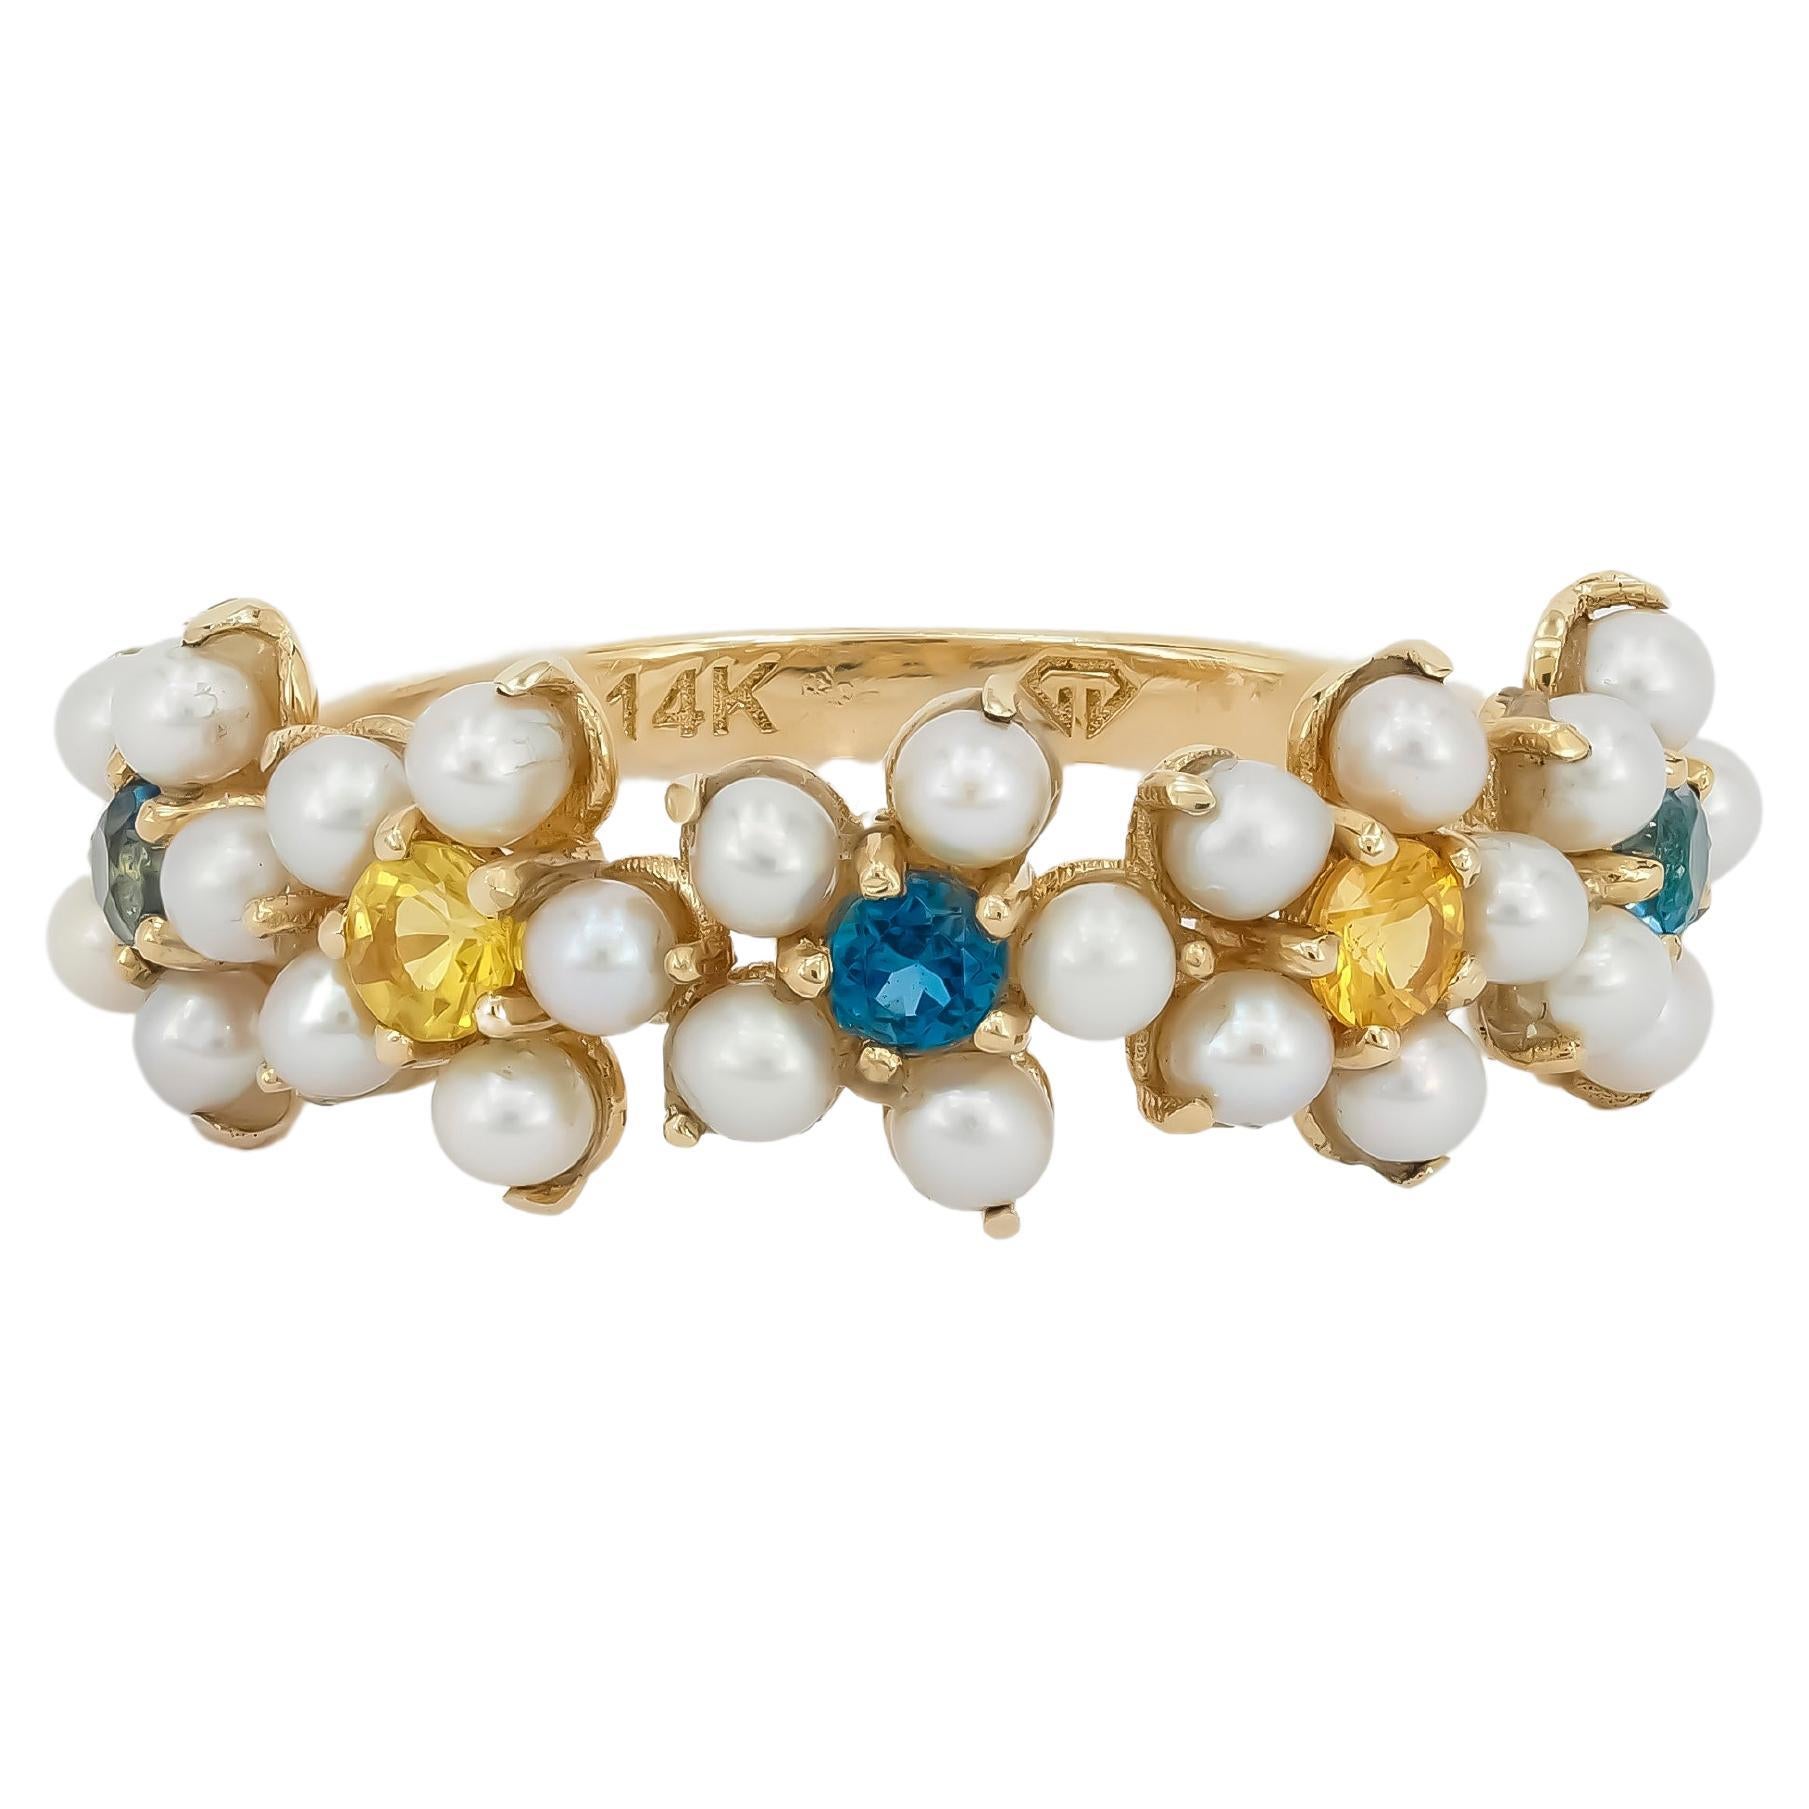 14k Gold Ring with Pearls and Sapphires